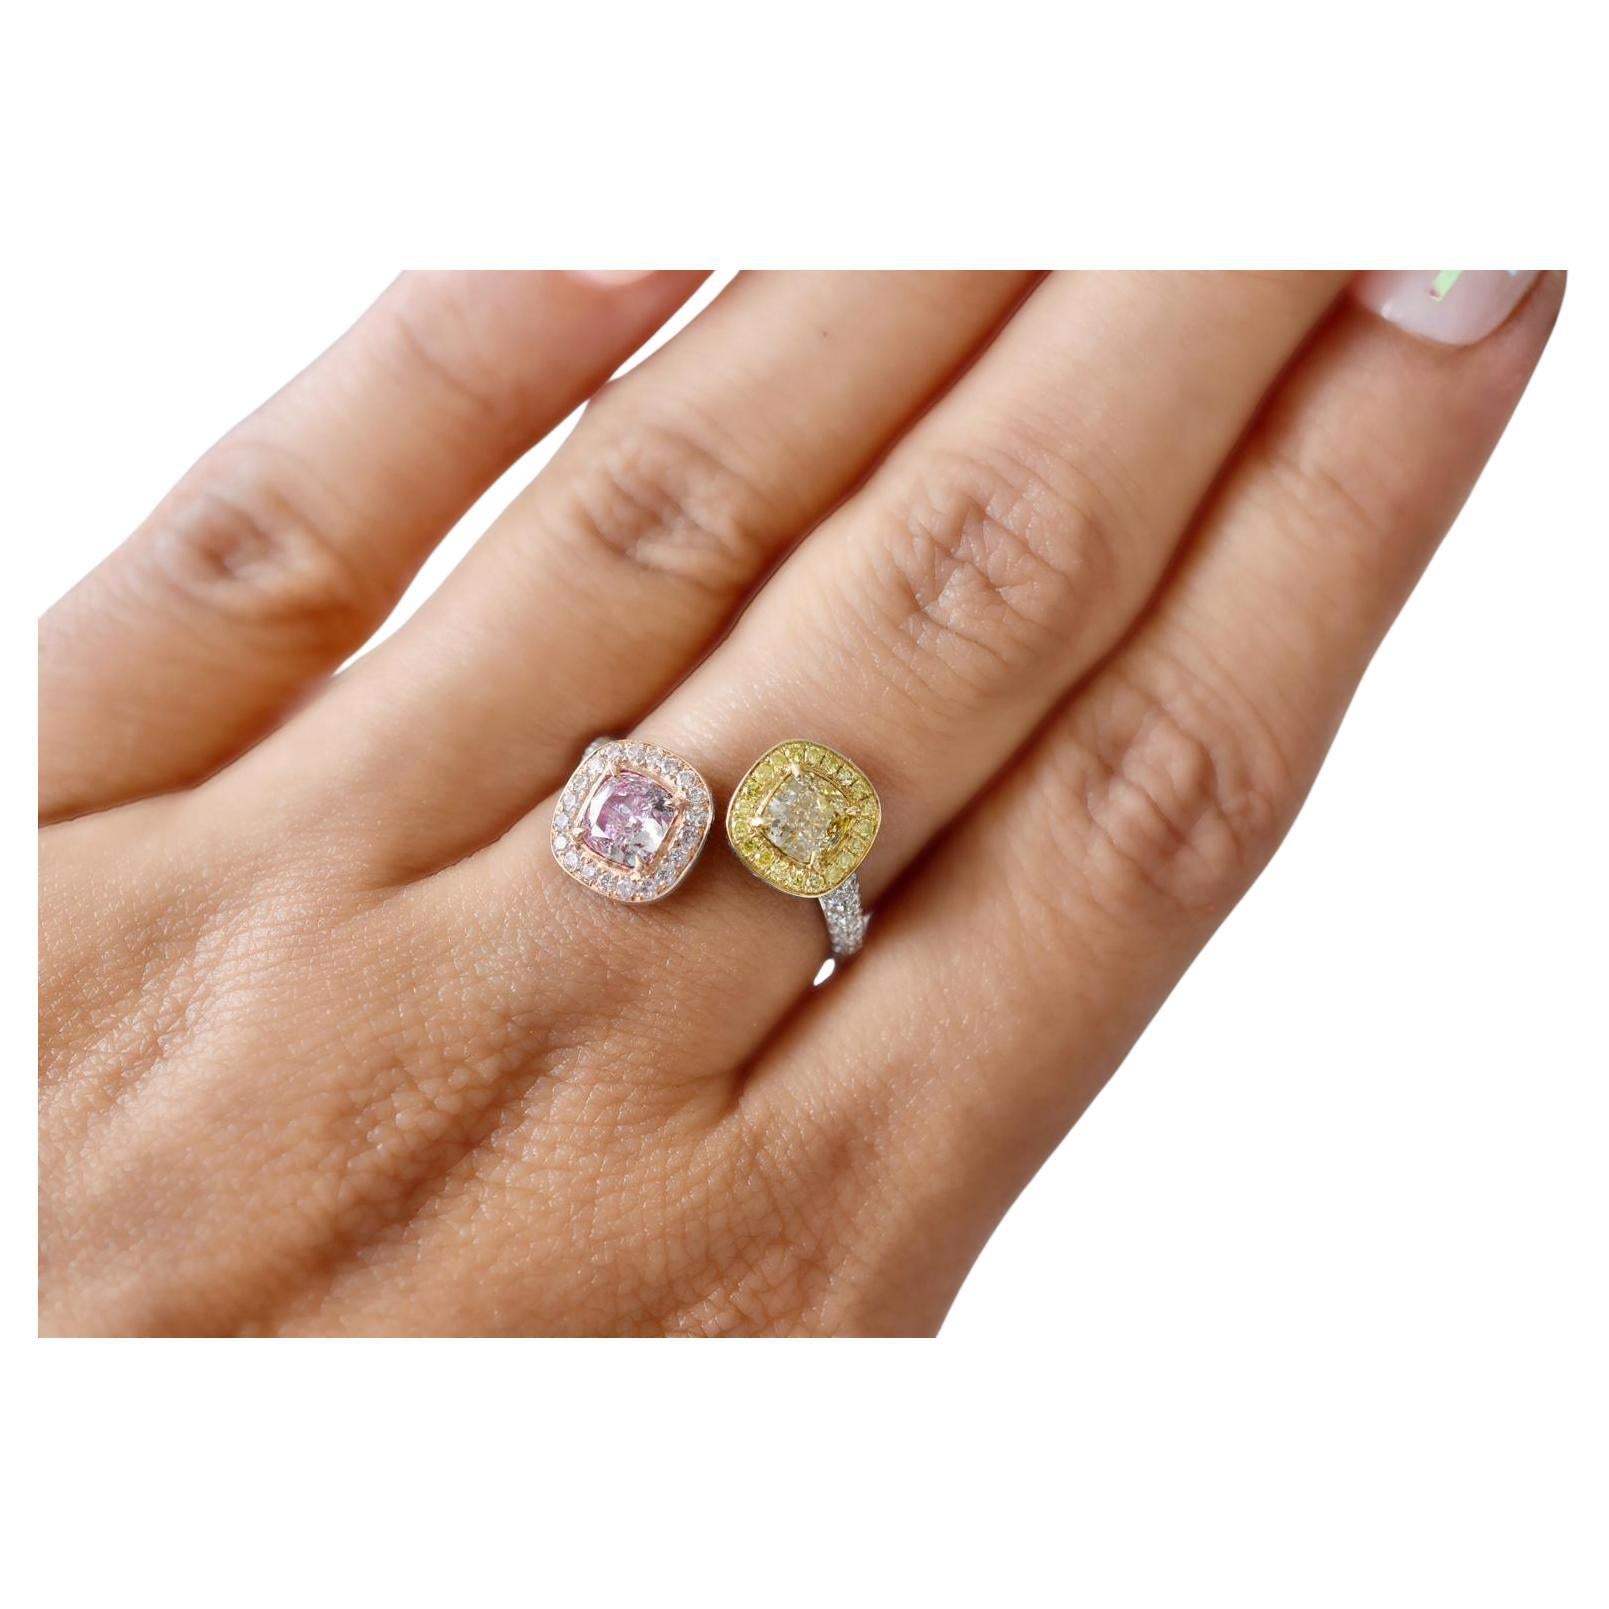 0.71 Carat Pink & Yellow Diamond Cocktail Ring GIA Certified For Sale